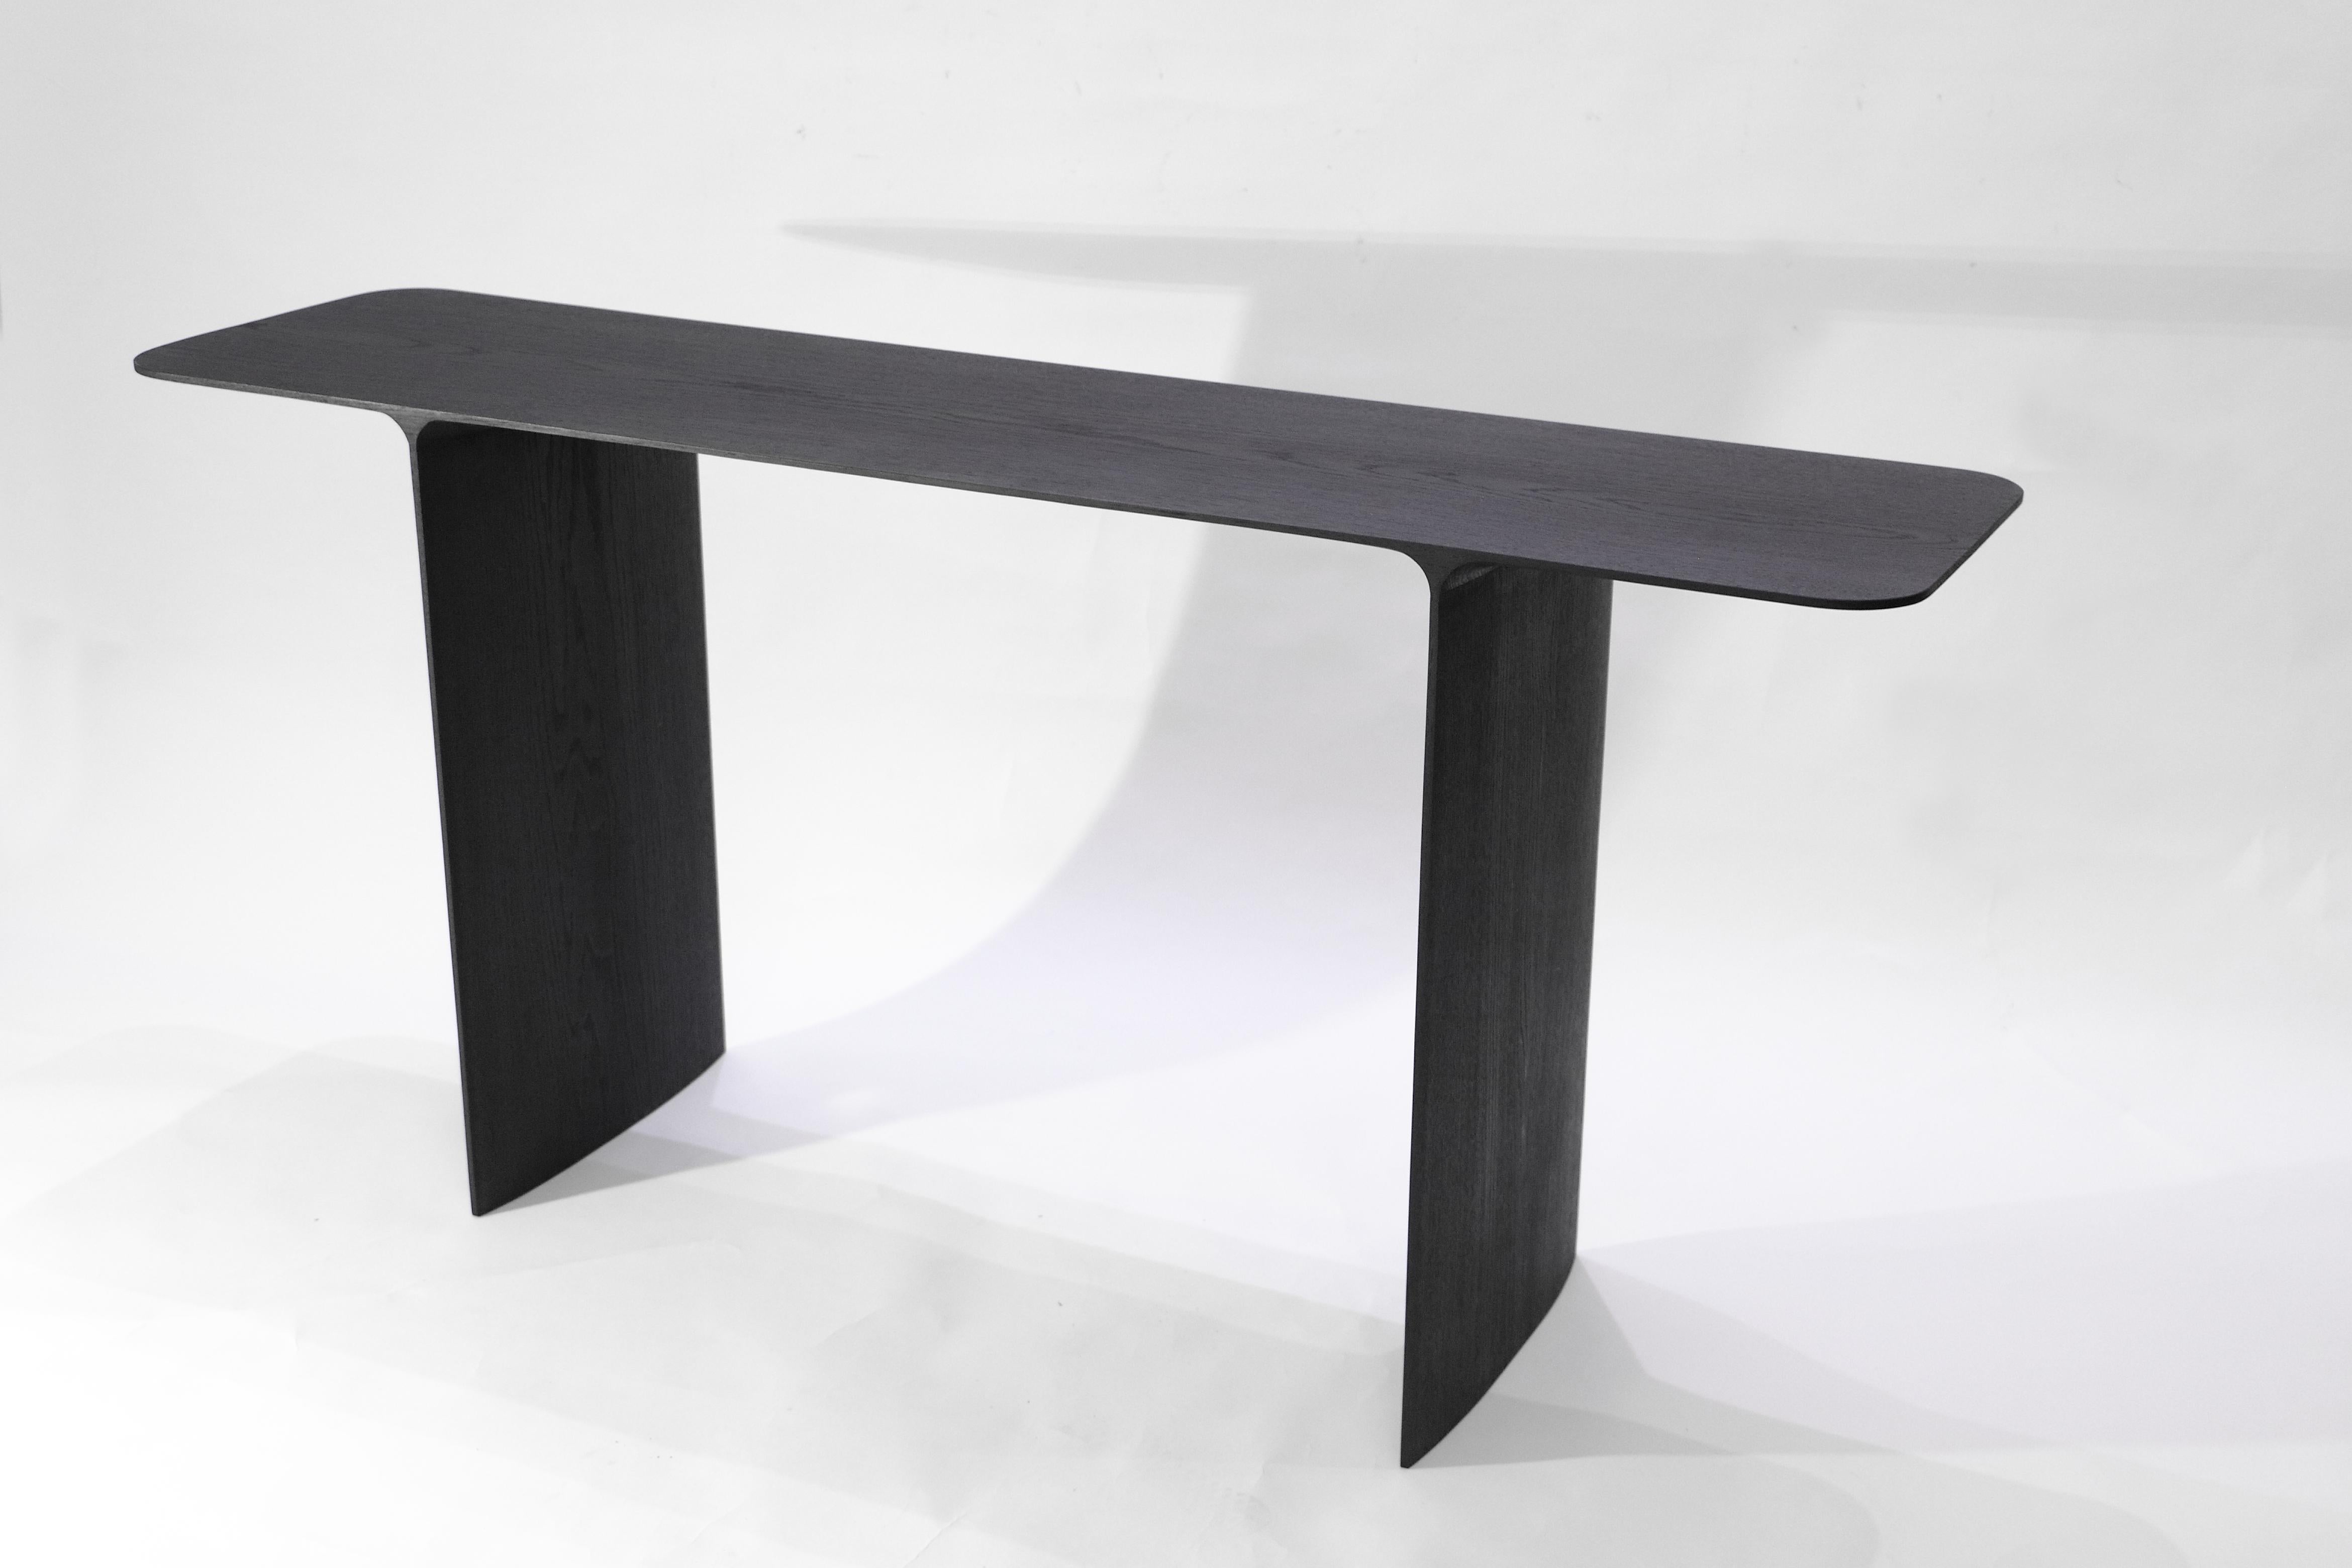 Shave console desk, hand-sculpted and signed by Cedric Breisacher
Hand-sculpted and signed by Cedric Breisacher
Materials: Oak , Oxyde black
Dimension: L 160 x l 40 x H 80
Can be made to order in other dimensions and finishes

Designer-sculptor,